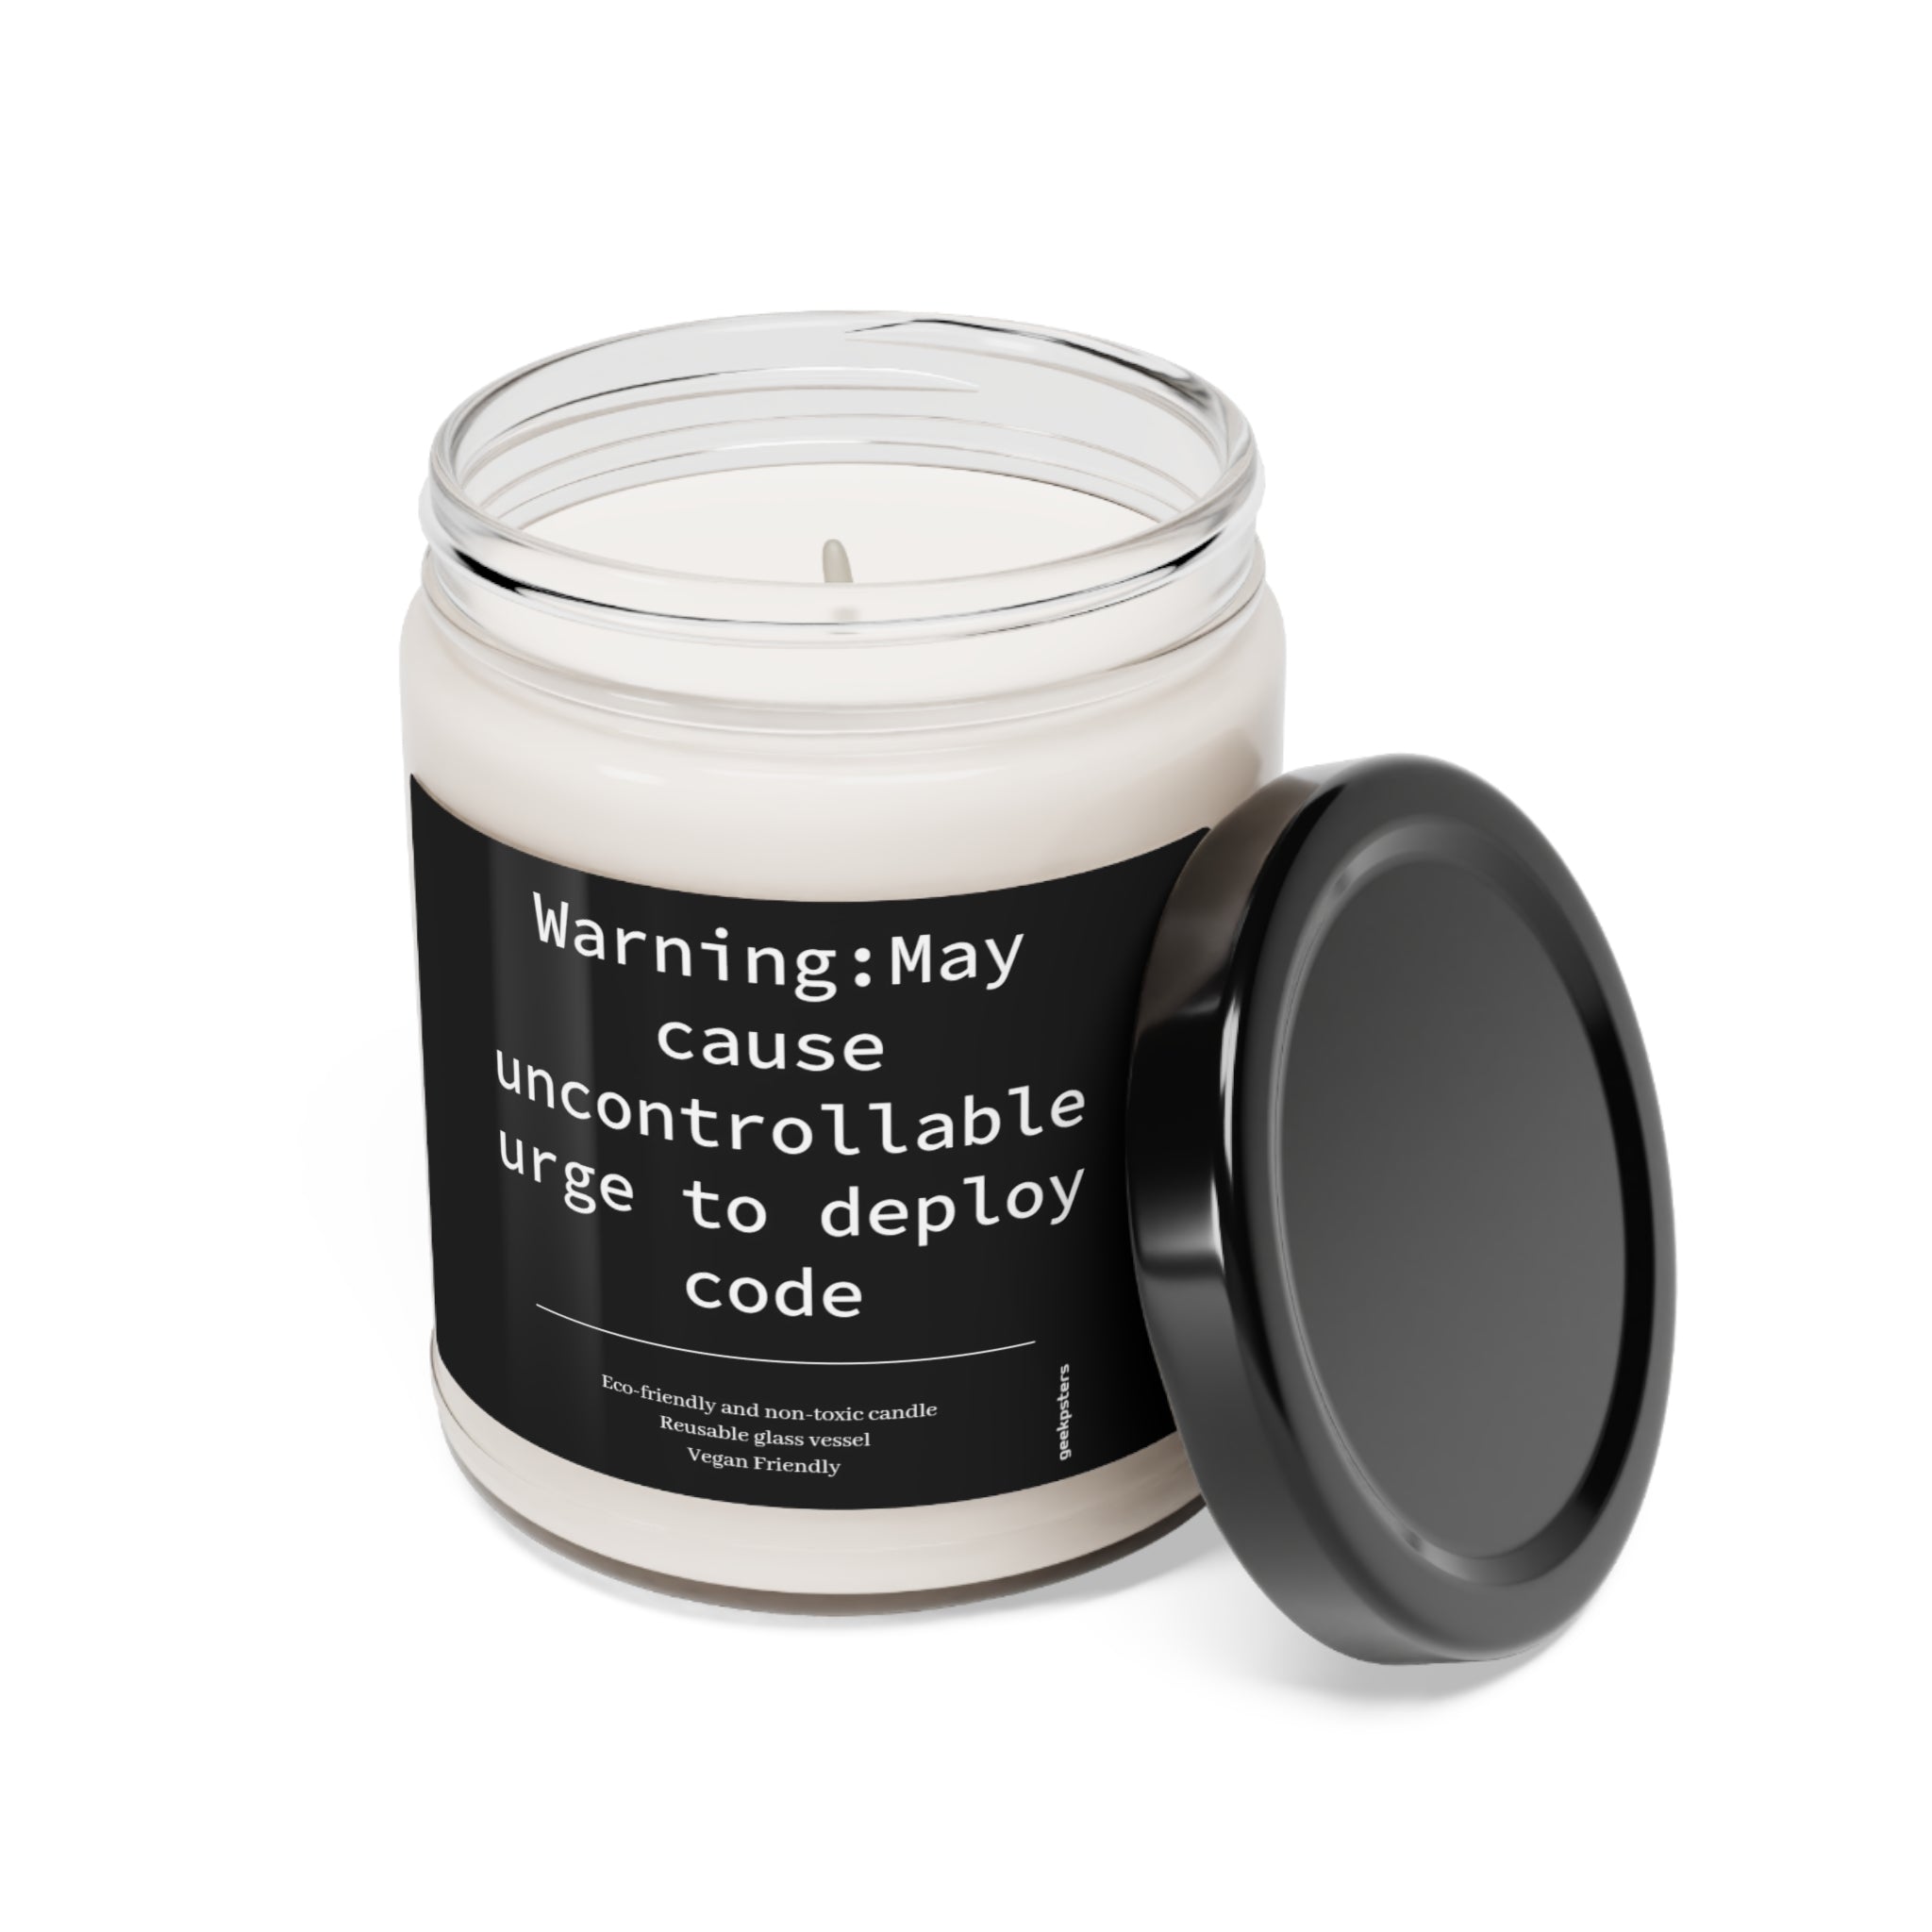 A Caution May Cause Urge to Deploy scented soy candle, with a humorous label that reads "warning: may cause uncontrollable urge to deploy code," displayed with the lid off, set against a white background.